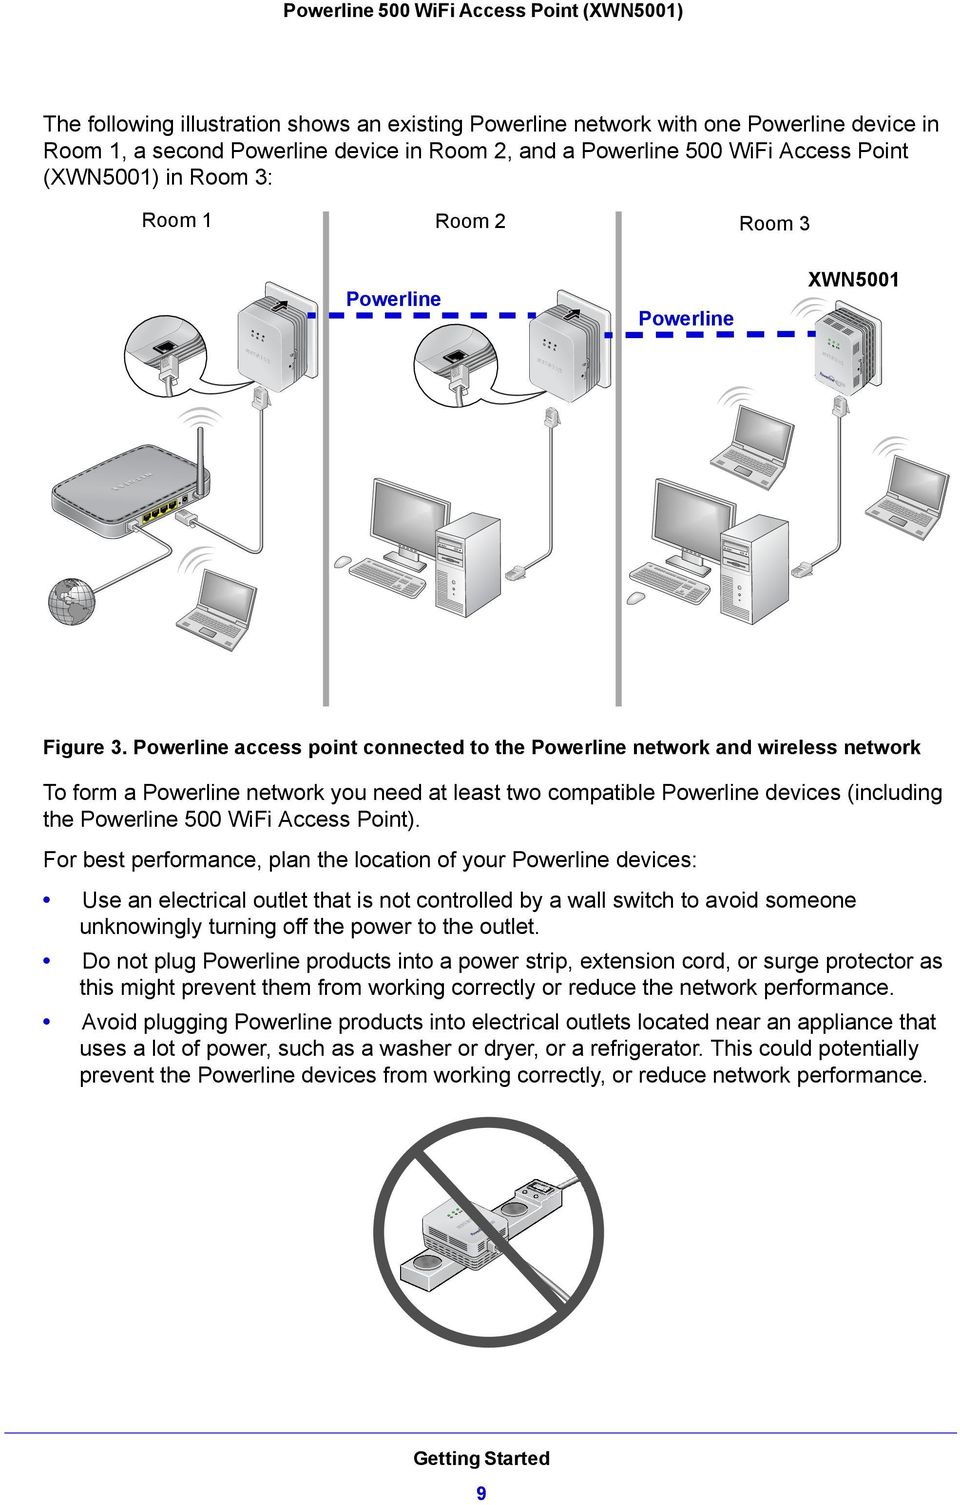 Powerline access point connected to the Powerline network and wireless network To form a Powerline network you need at least two compatible Powerline devices (including the Powerline 500 WiFi Access